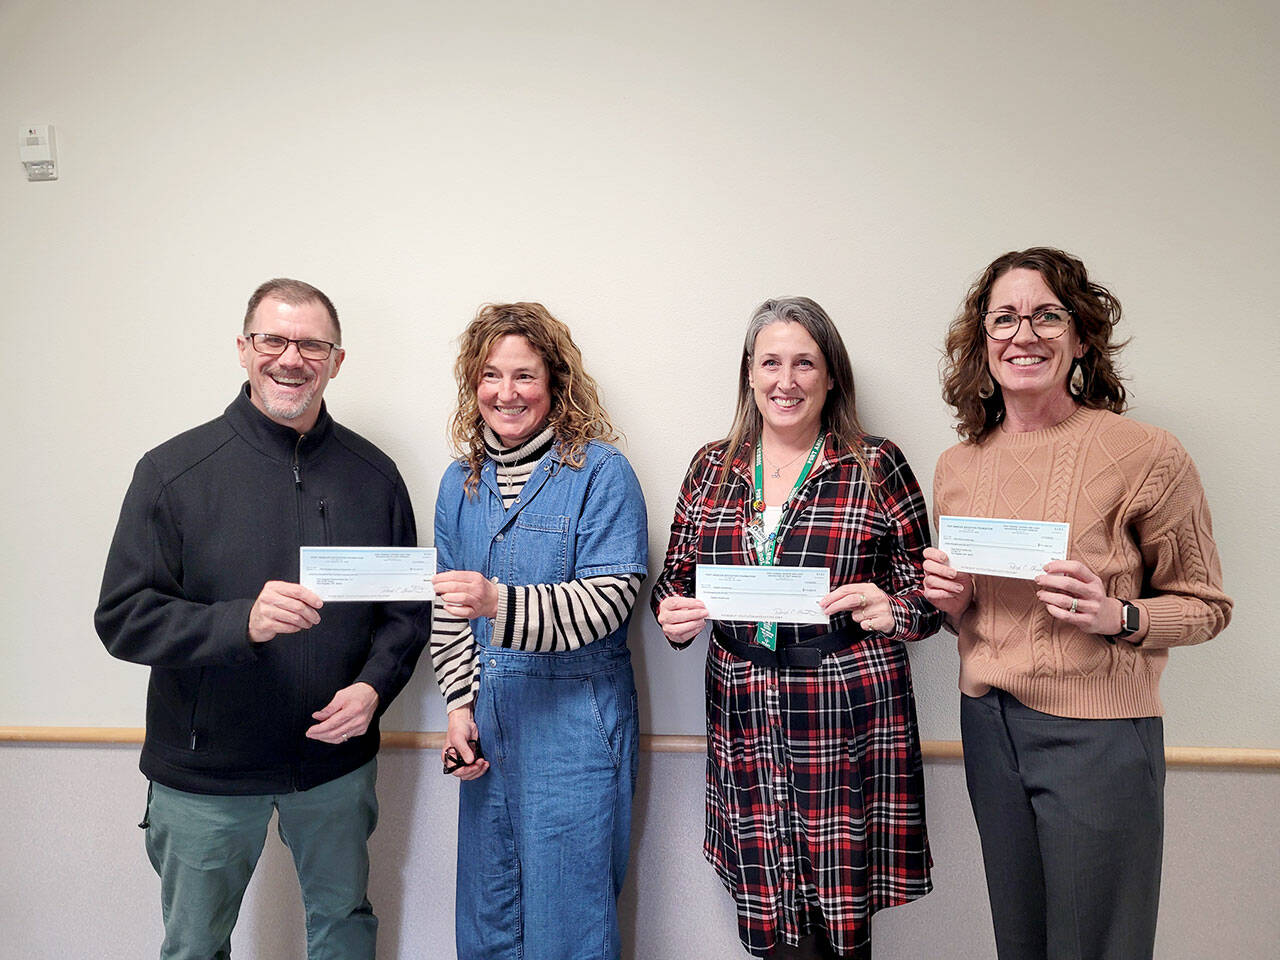 Pictured, left to right, are Marty Brewer, Port Angeles School District superintendent; Michelle Turner, Port Angeles Education Foundation president; Michell Gentry, Port Angeles AmeriCorps coordinator; and Kayla Oakes, Field Arts and Events Hall.